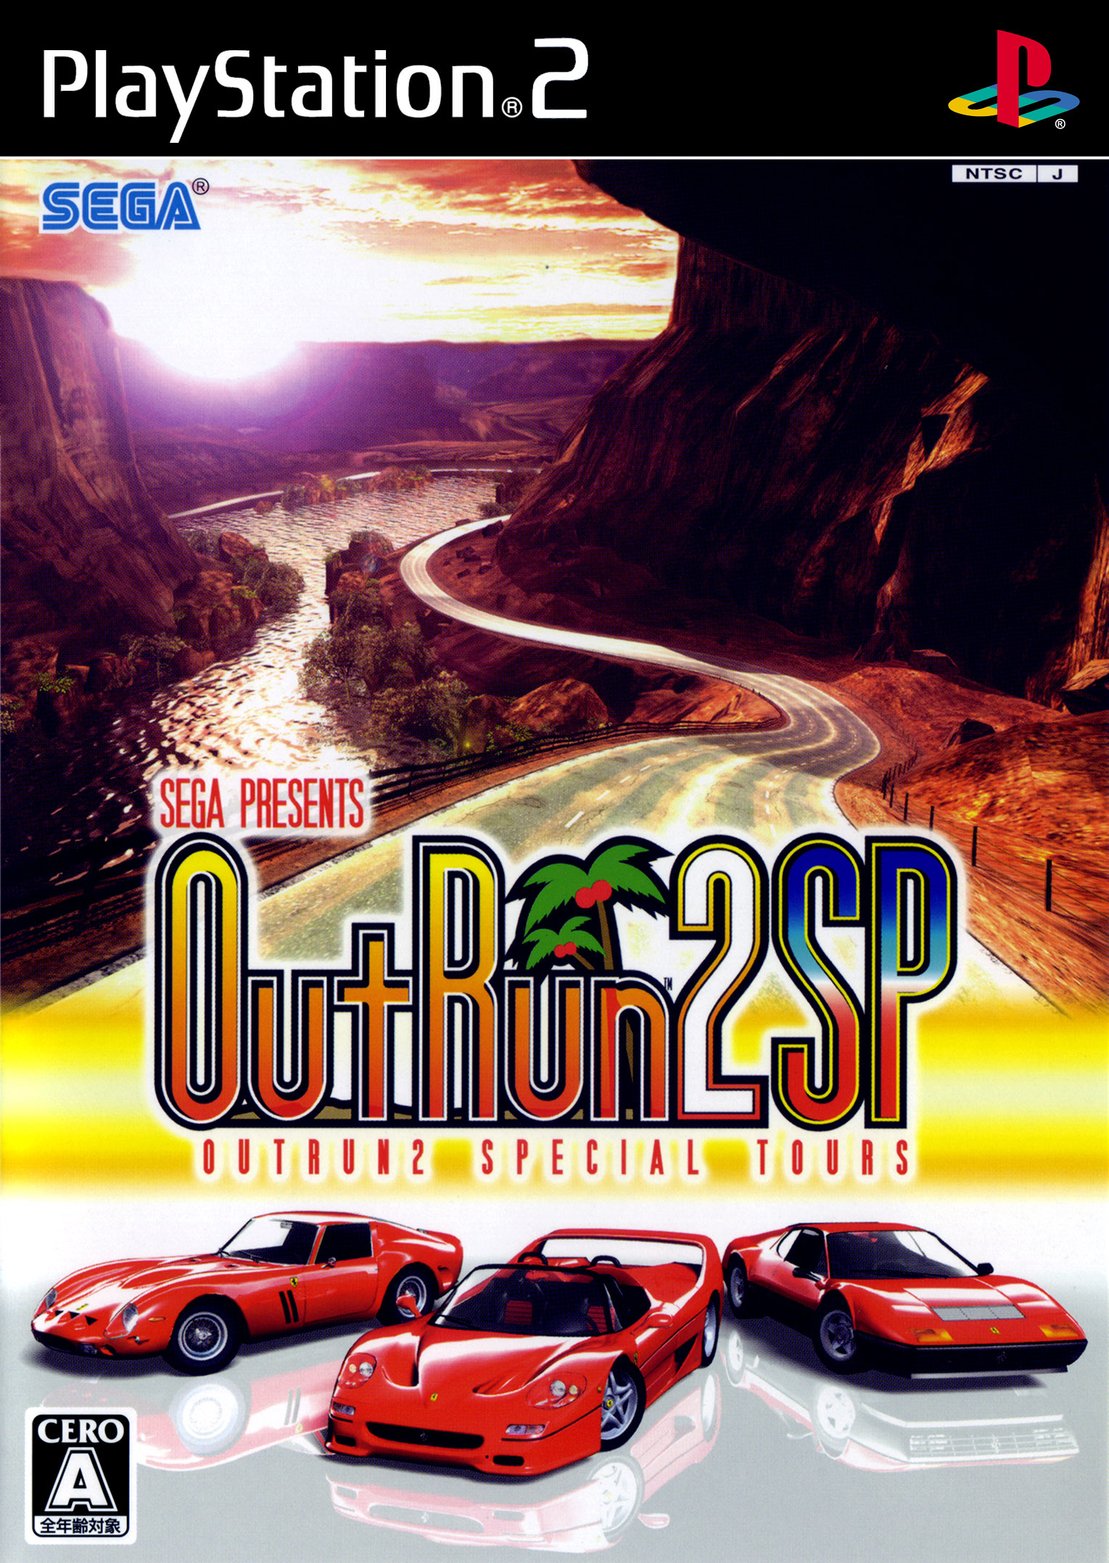 OutRun 2 SP (J+English Patched) PS2 ISO - CDRomance